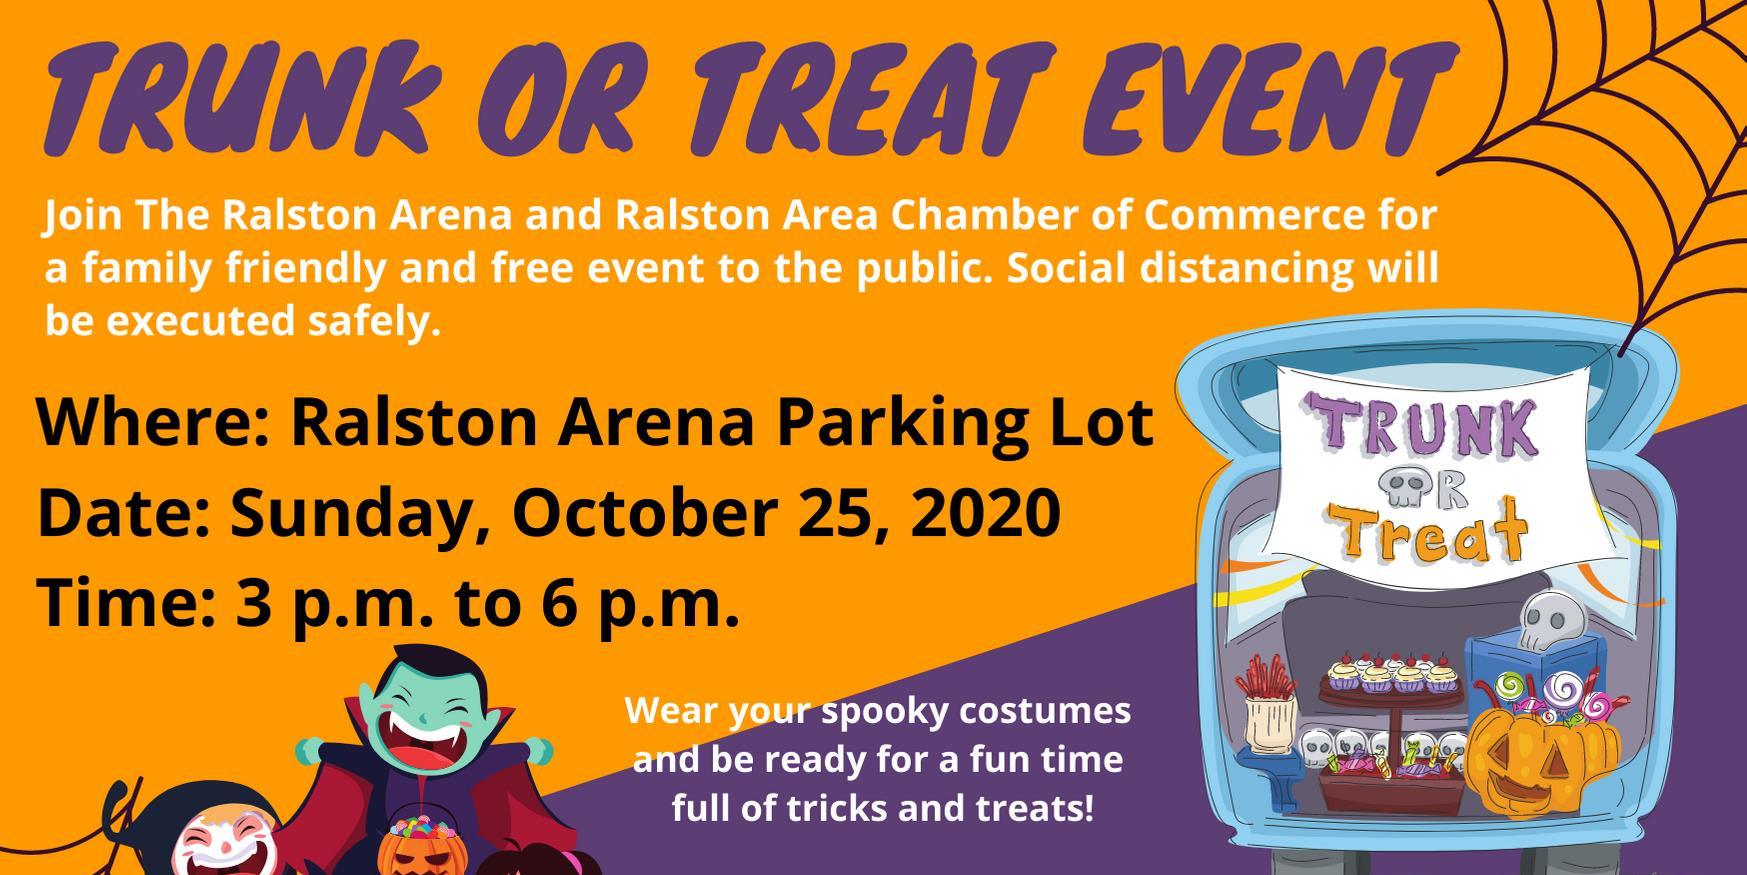 Trunk or Treat - Ralston Arena promotional image